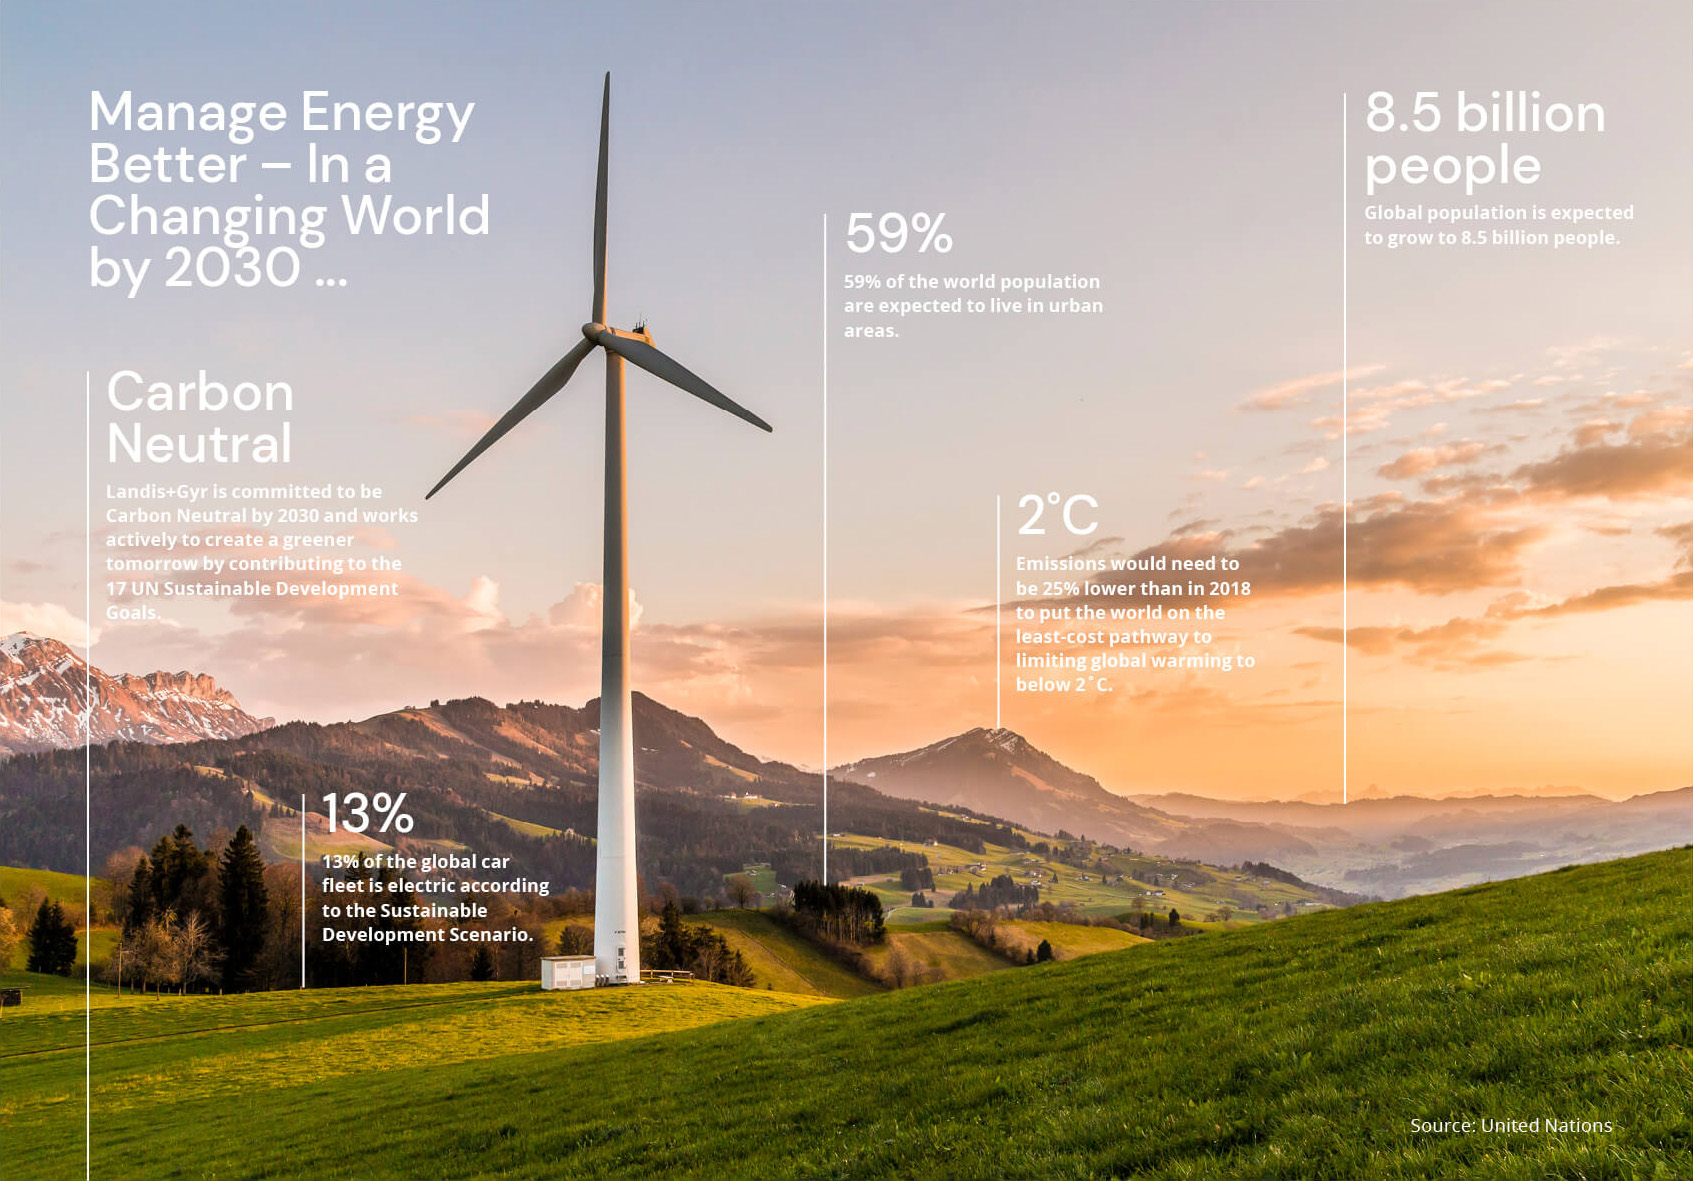 Manage Energy Better - In a Changing World